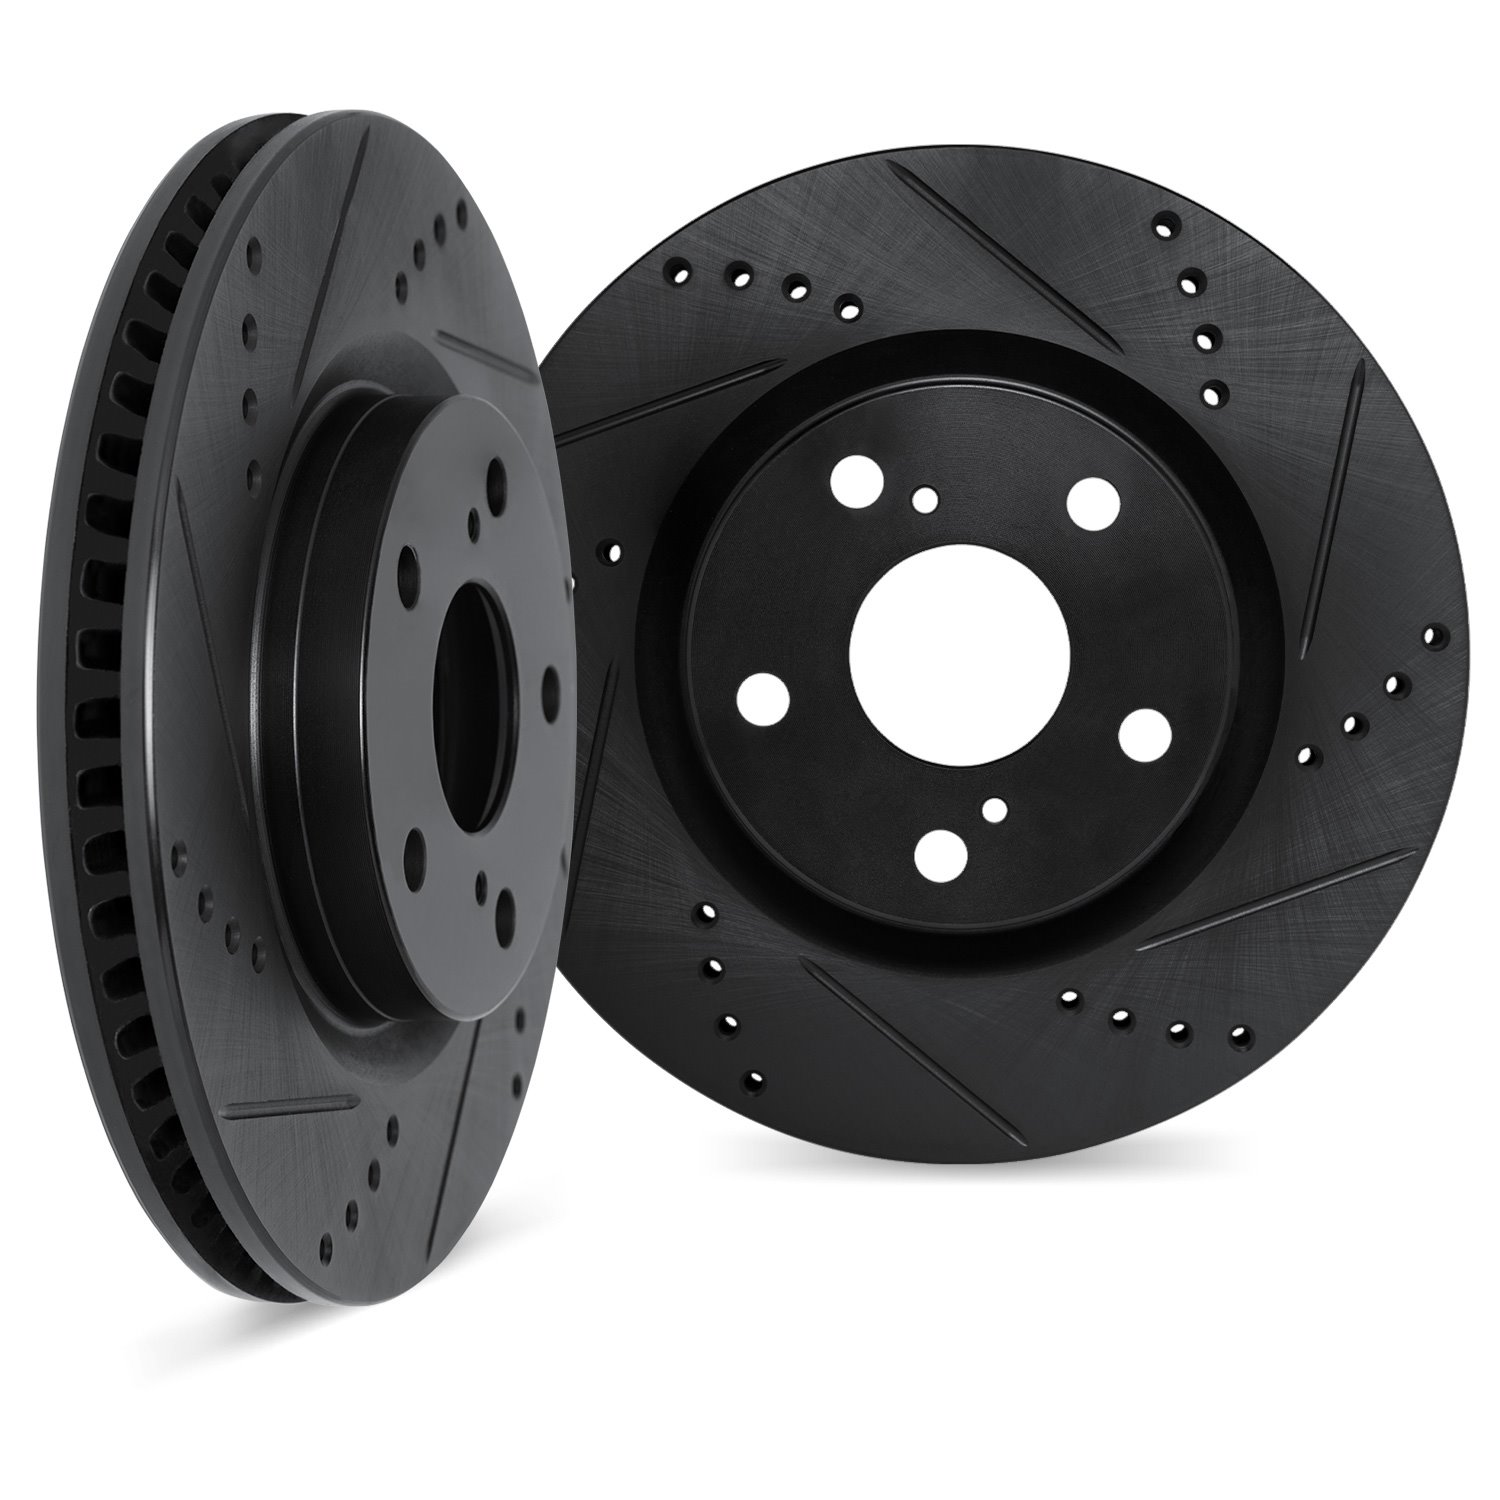 8002-58035 Drilled/Slotted Brake Rotors [Black], Fits Select Acura/Honda, Position: Front